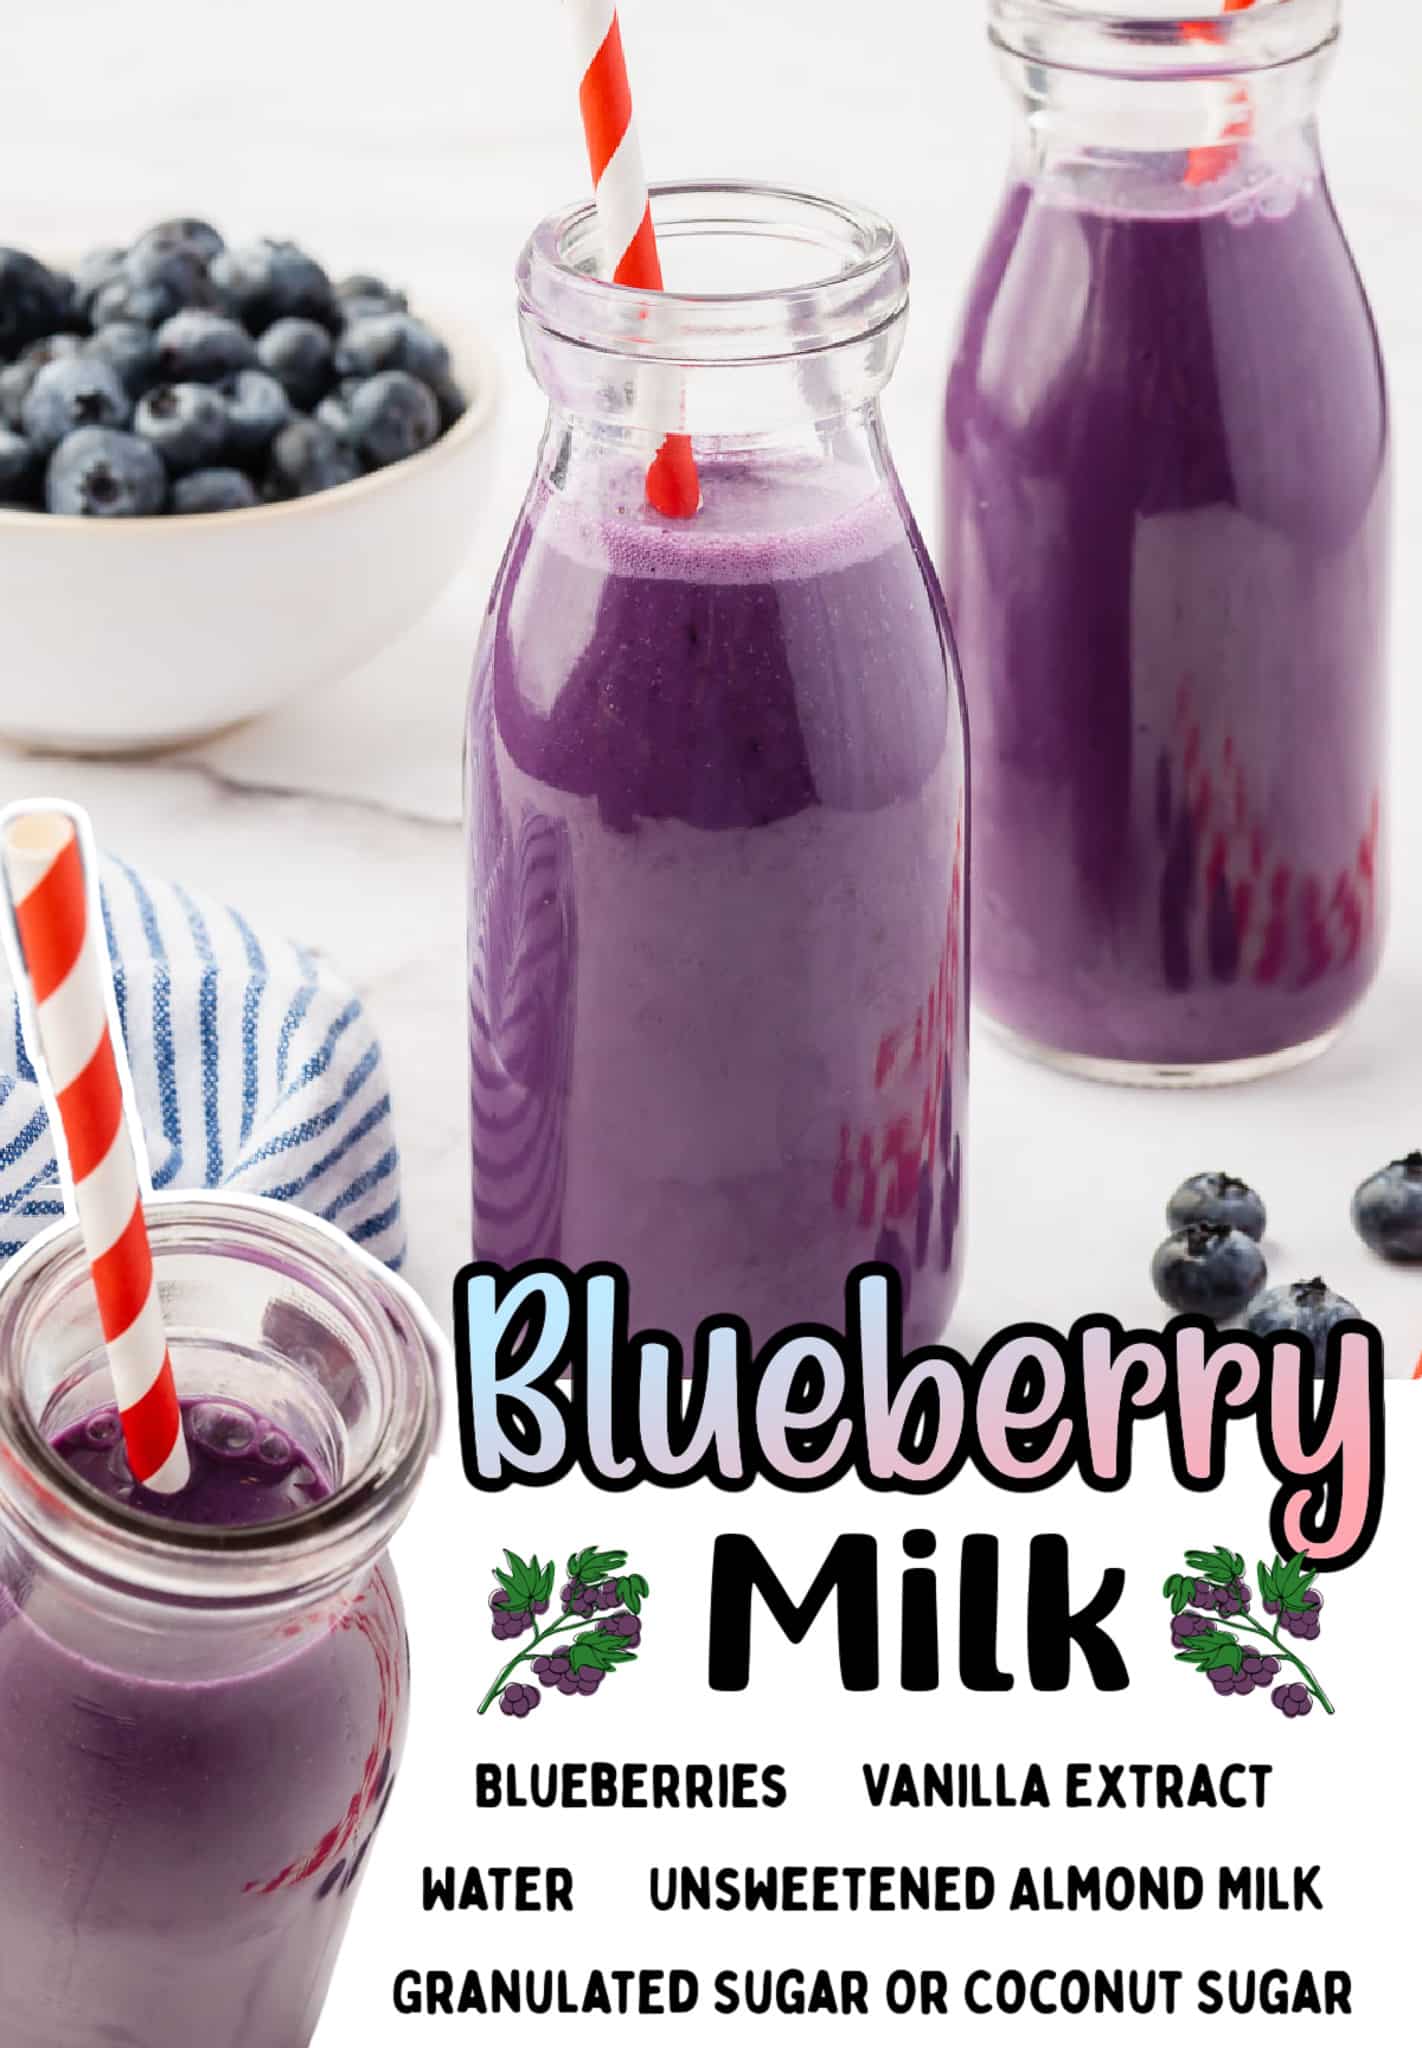 Images of glass bottles filled with purple milk. Text overlay says "blueberry milk" and lists the ingredients needed to make the recipe.